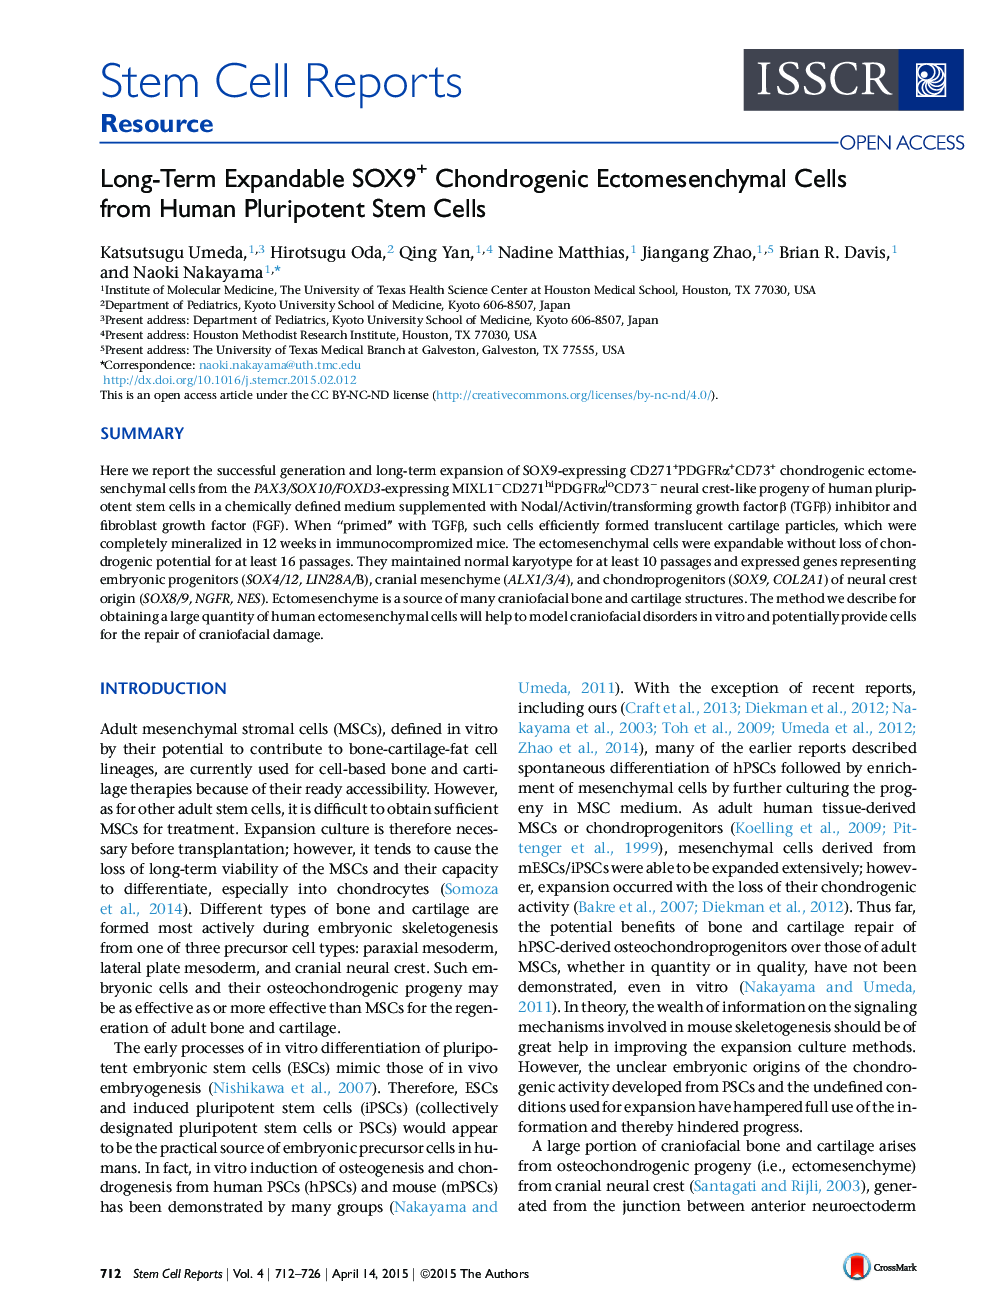 Long-Term Expandable SOX9+ Chondrogenic Ectomesenchymal Cells from Human Pluripotent Stem Cells 